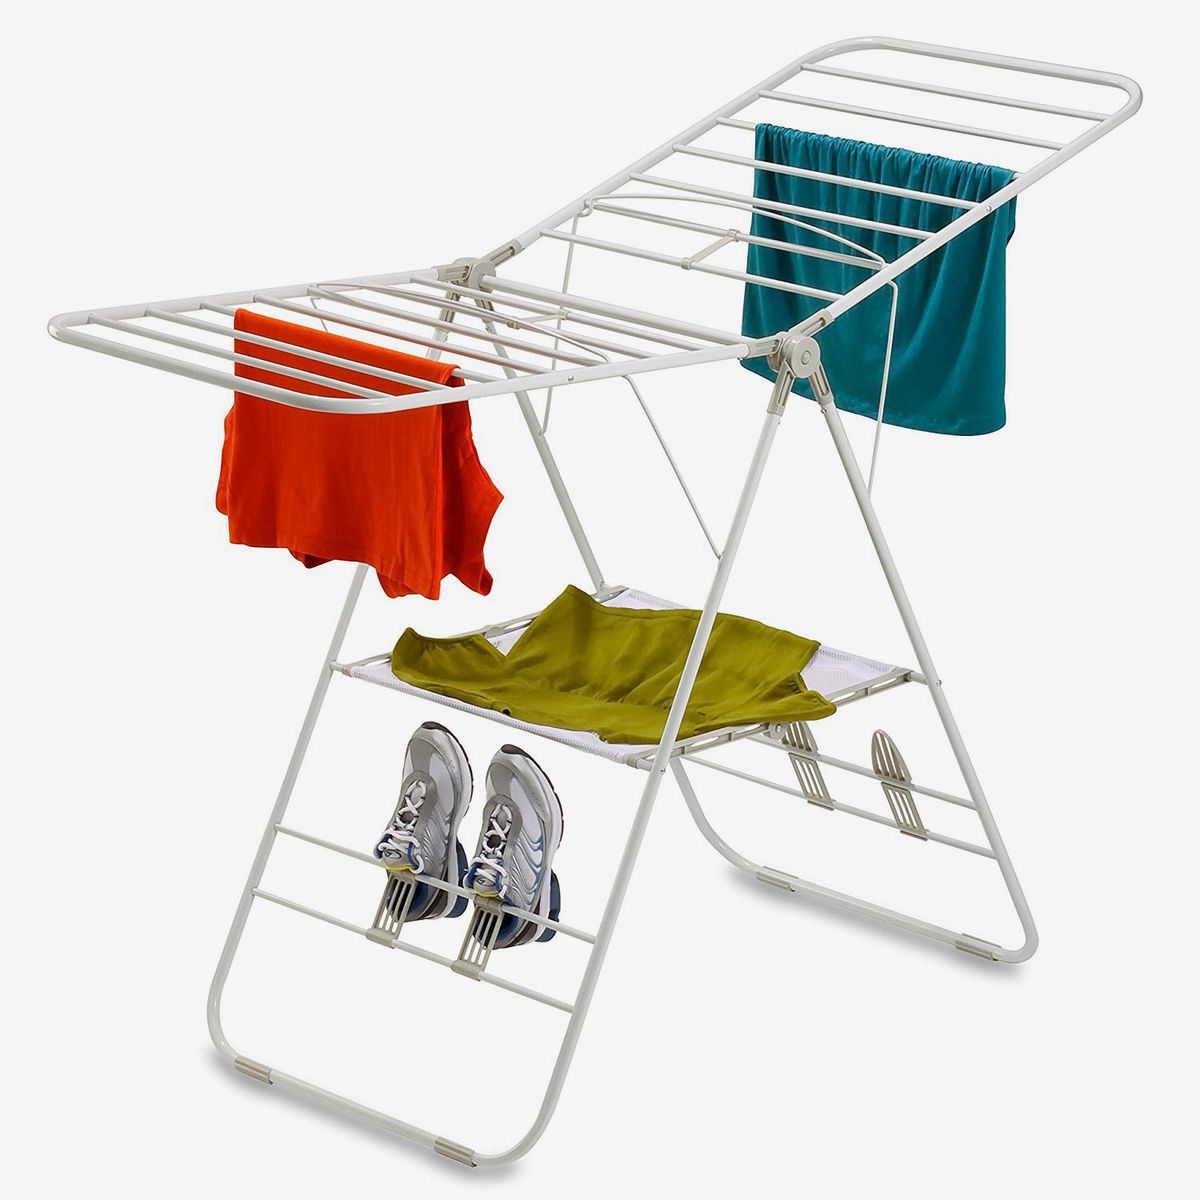 Square, 40-Clips JAUREE Clothes Drying Rack Stainless Steel Laundry Hanging Rack for Balcony and Courtyard Suitable for Socks Drying Towels and Baby Clothes Underwears